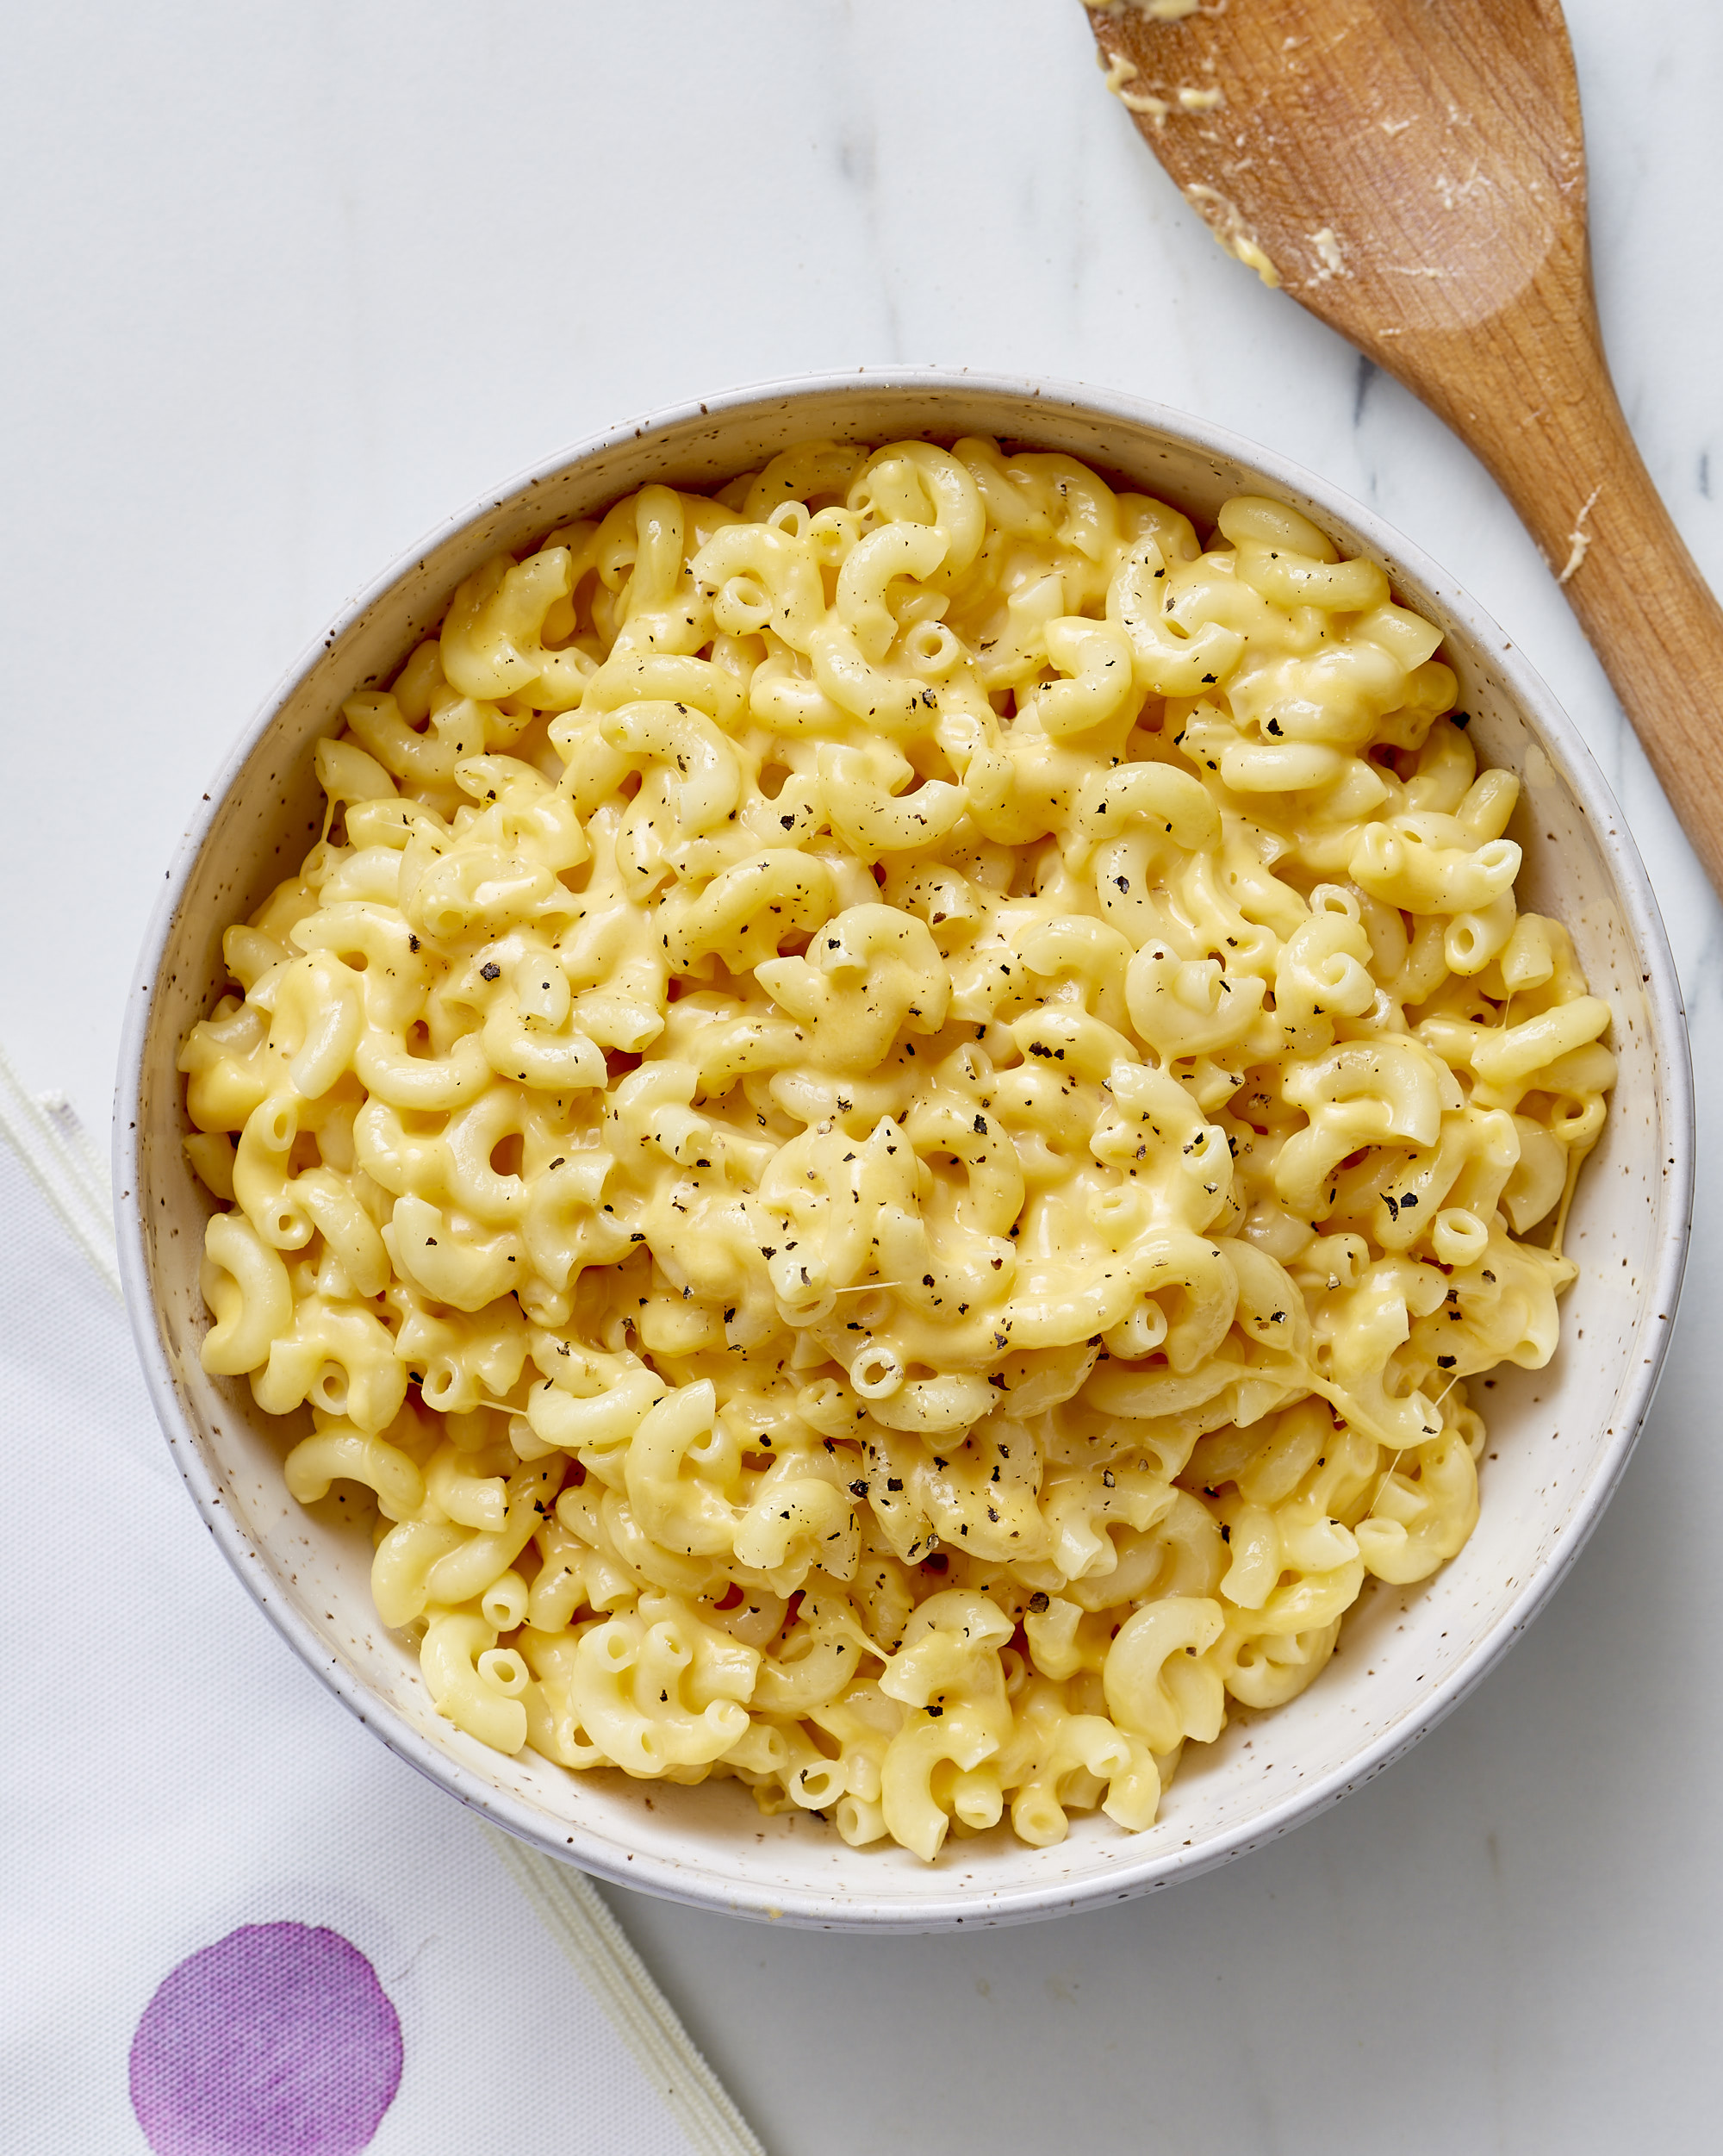 How To Make Cheese For Mac And Cheese